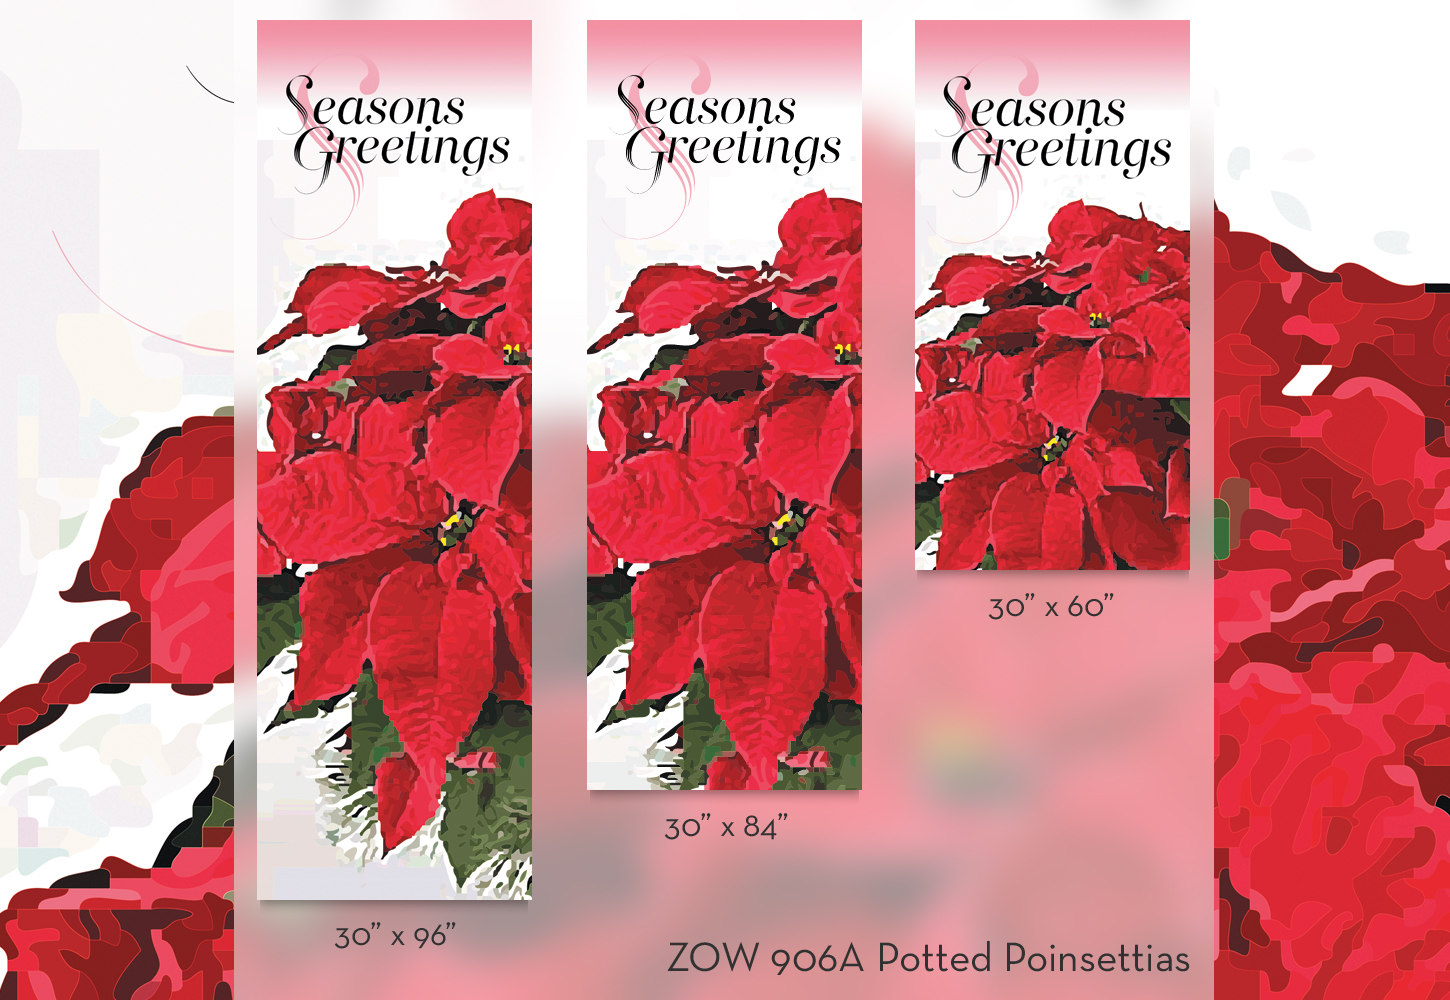 ZOW 906A Potted Poinsettias